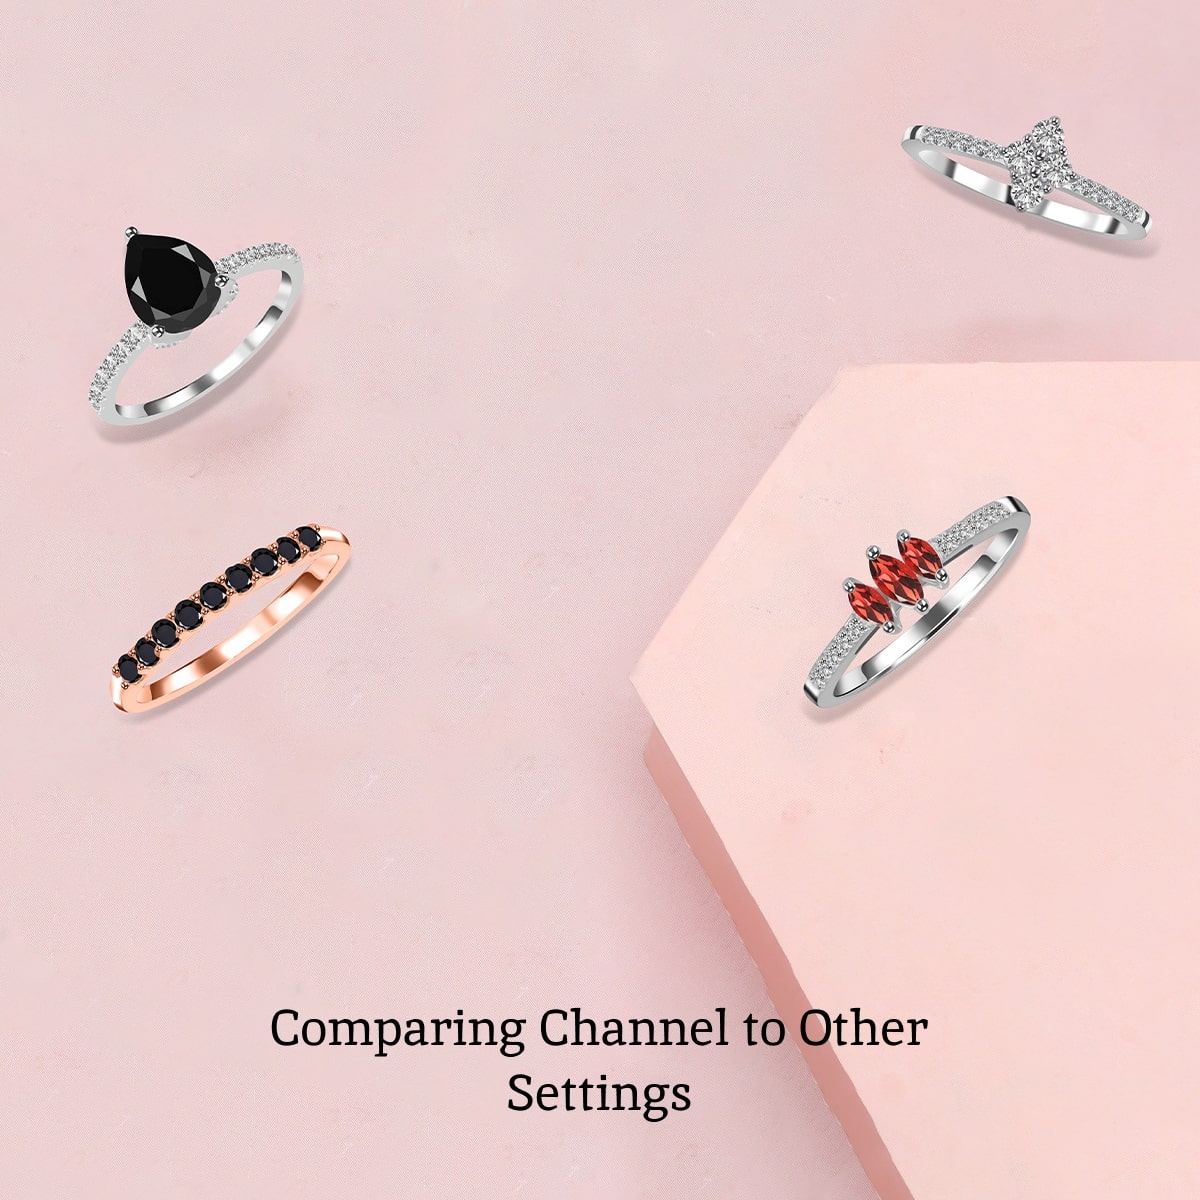 Channel Setting vs Other Settings